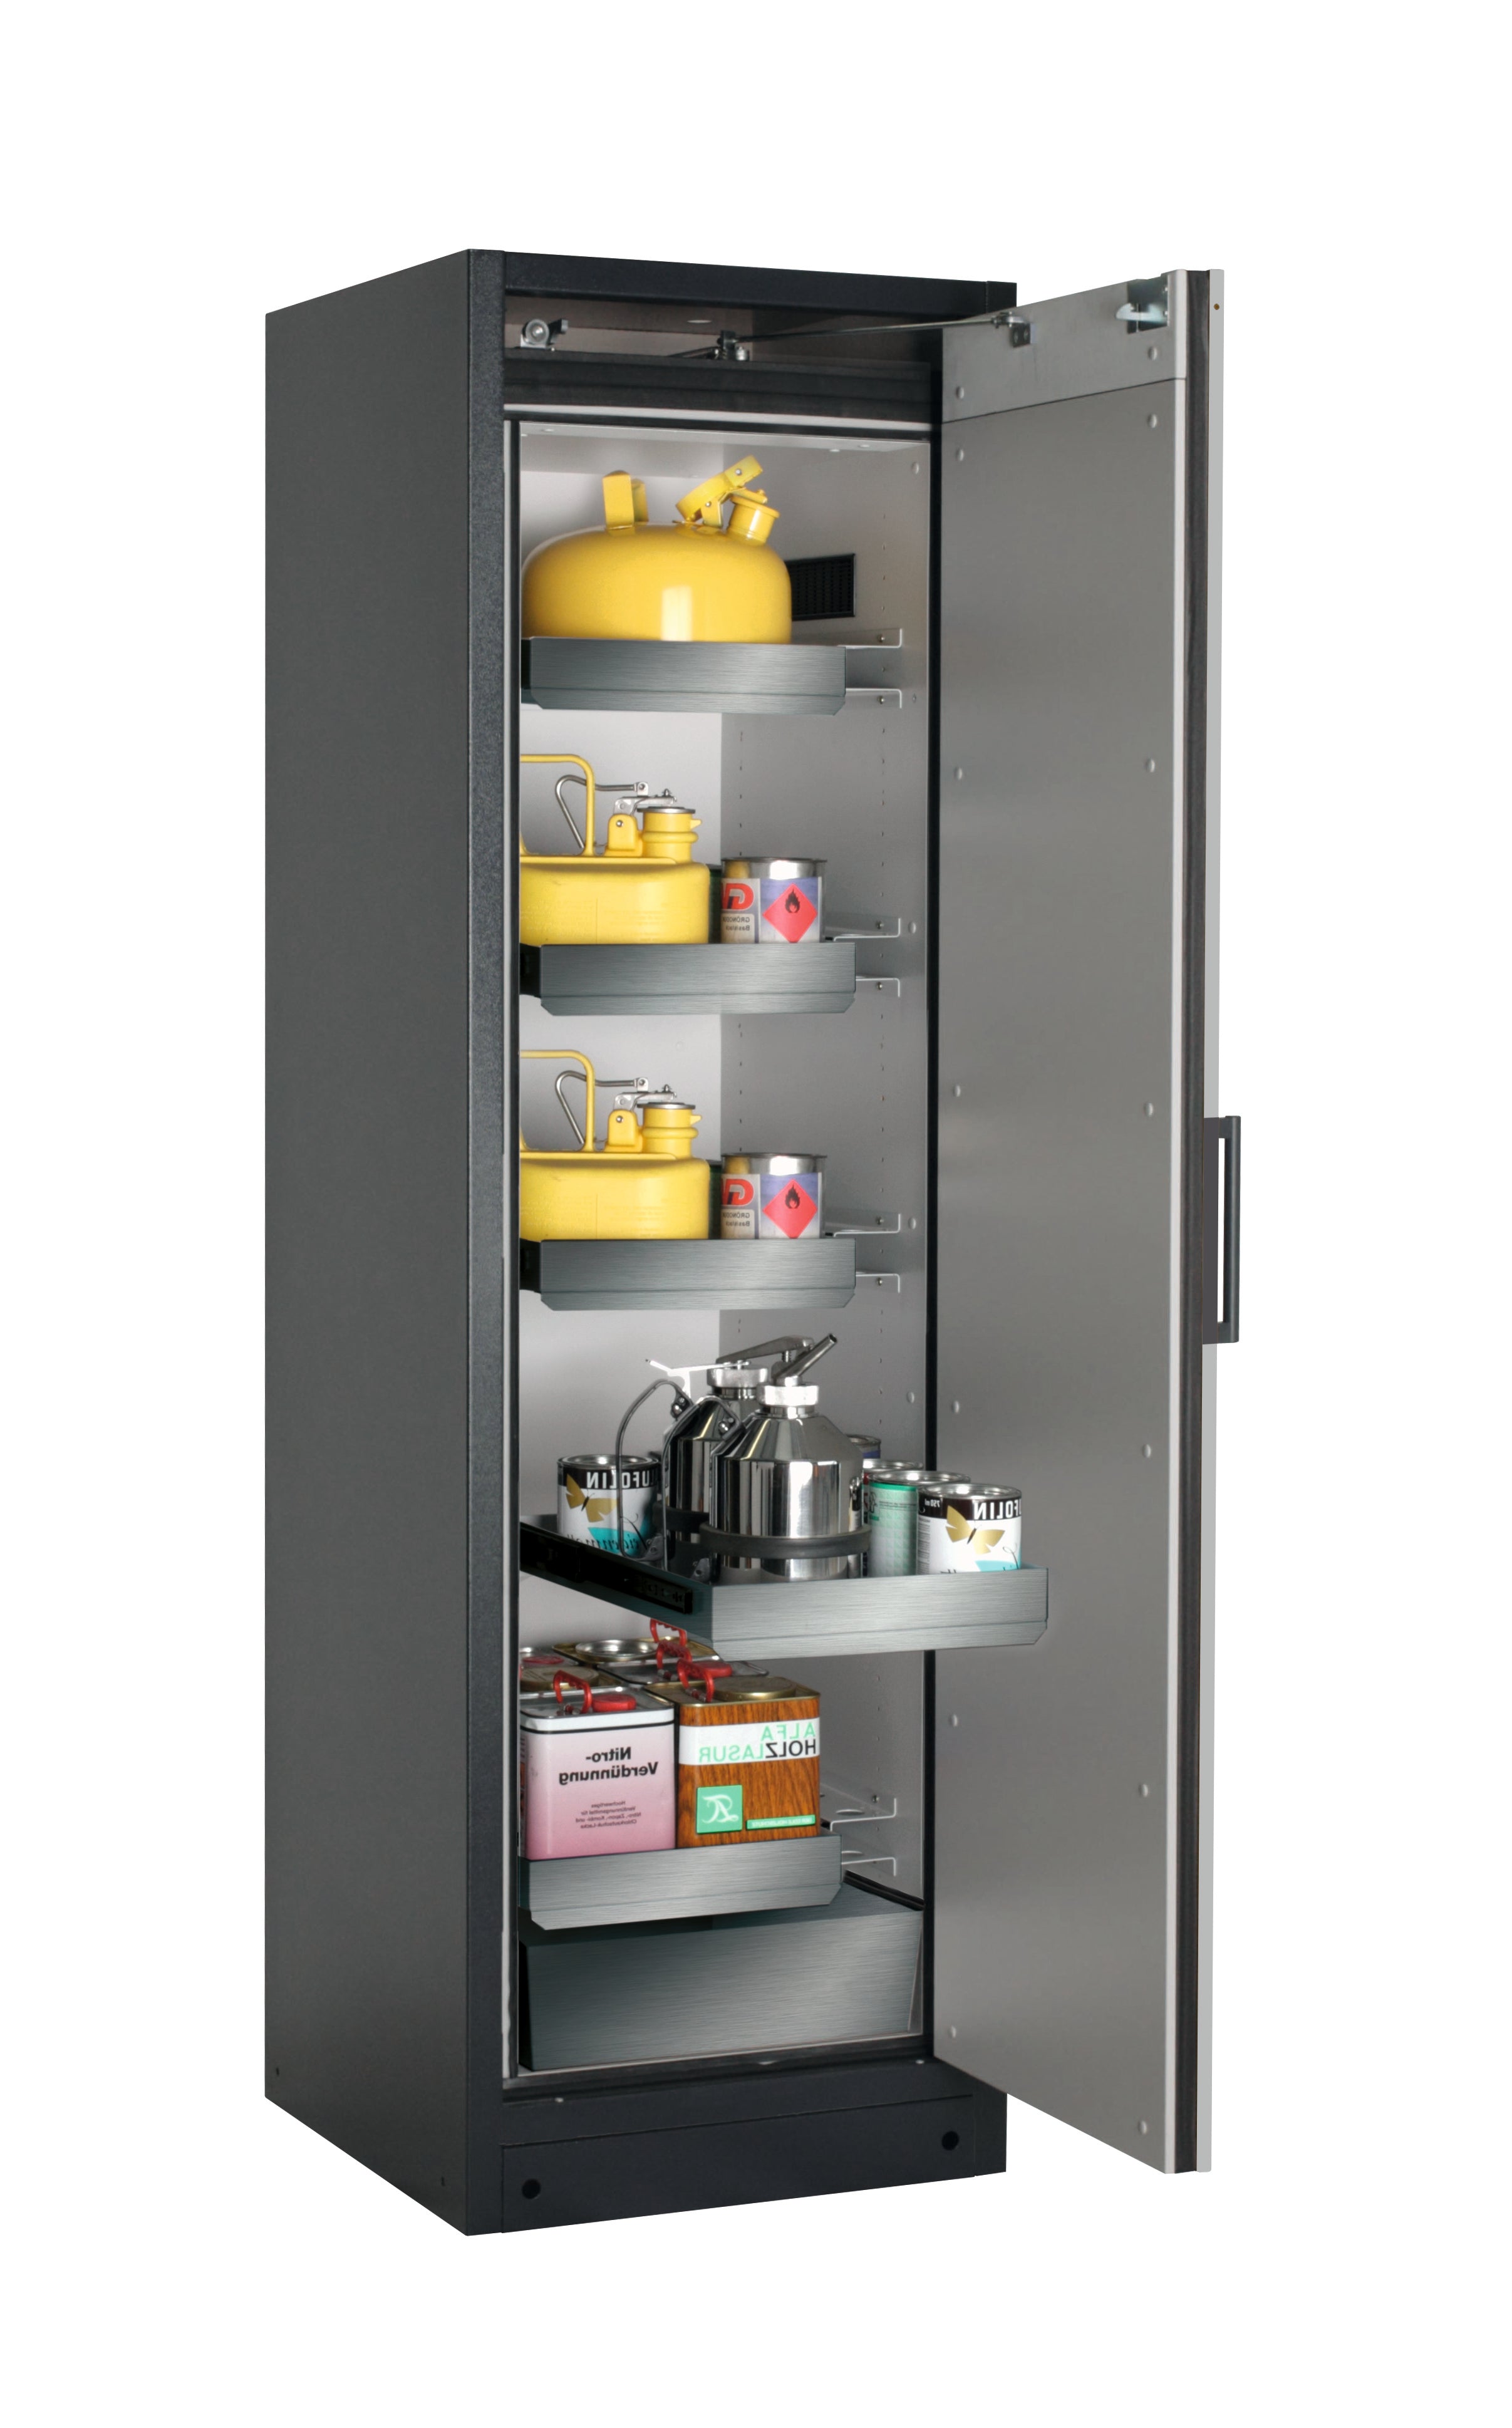 Type 90 safety storage cabinet Q-CLASSIC-90 model Q90.195.060.R in pure white RAL 9010 with 4x drawer (standard) (stainless steel 1.4301),